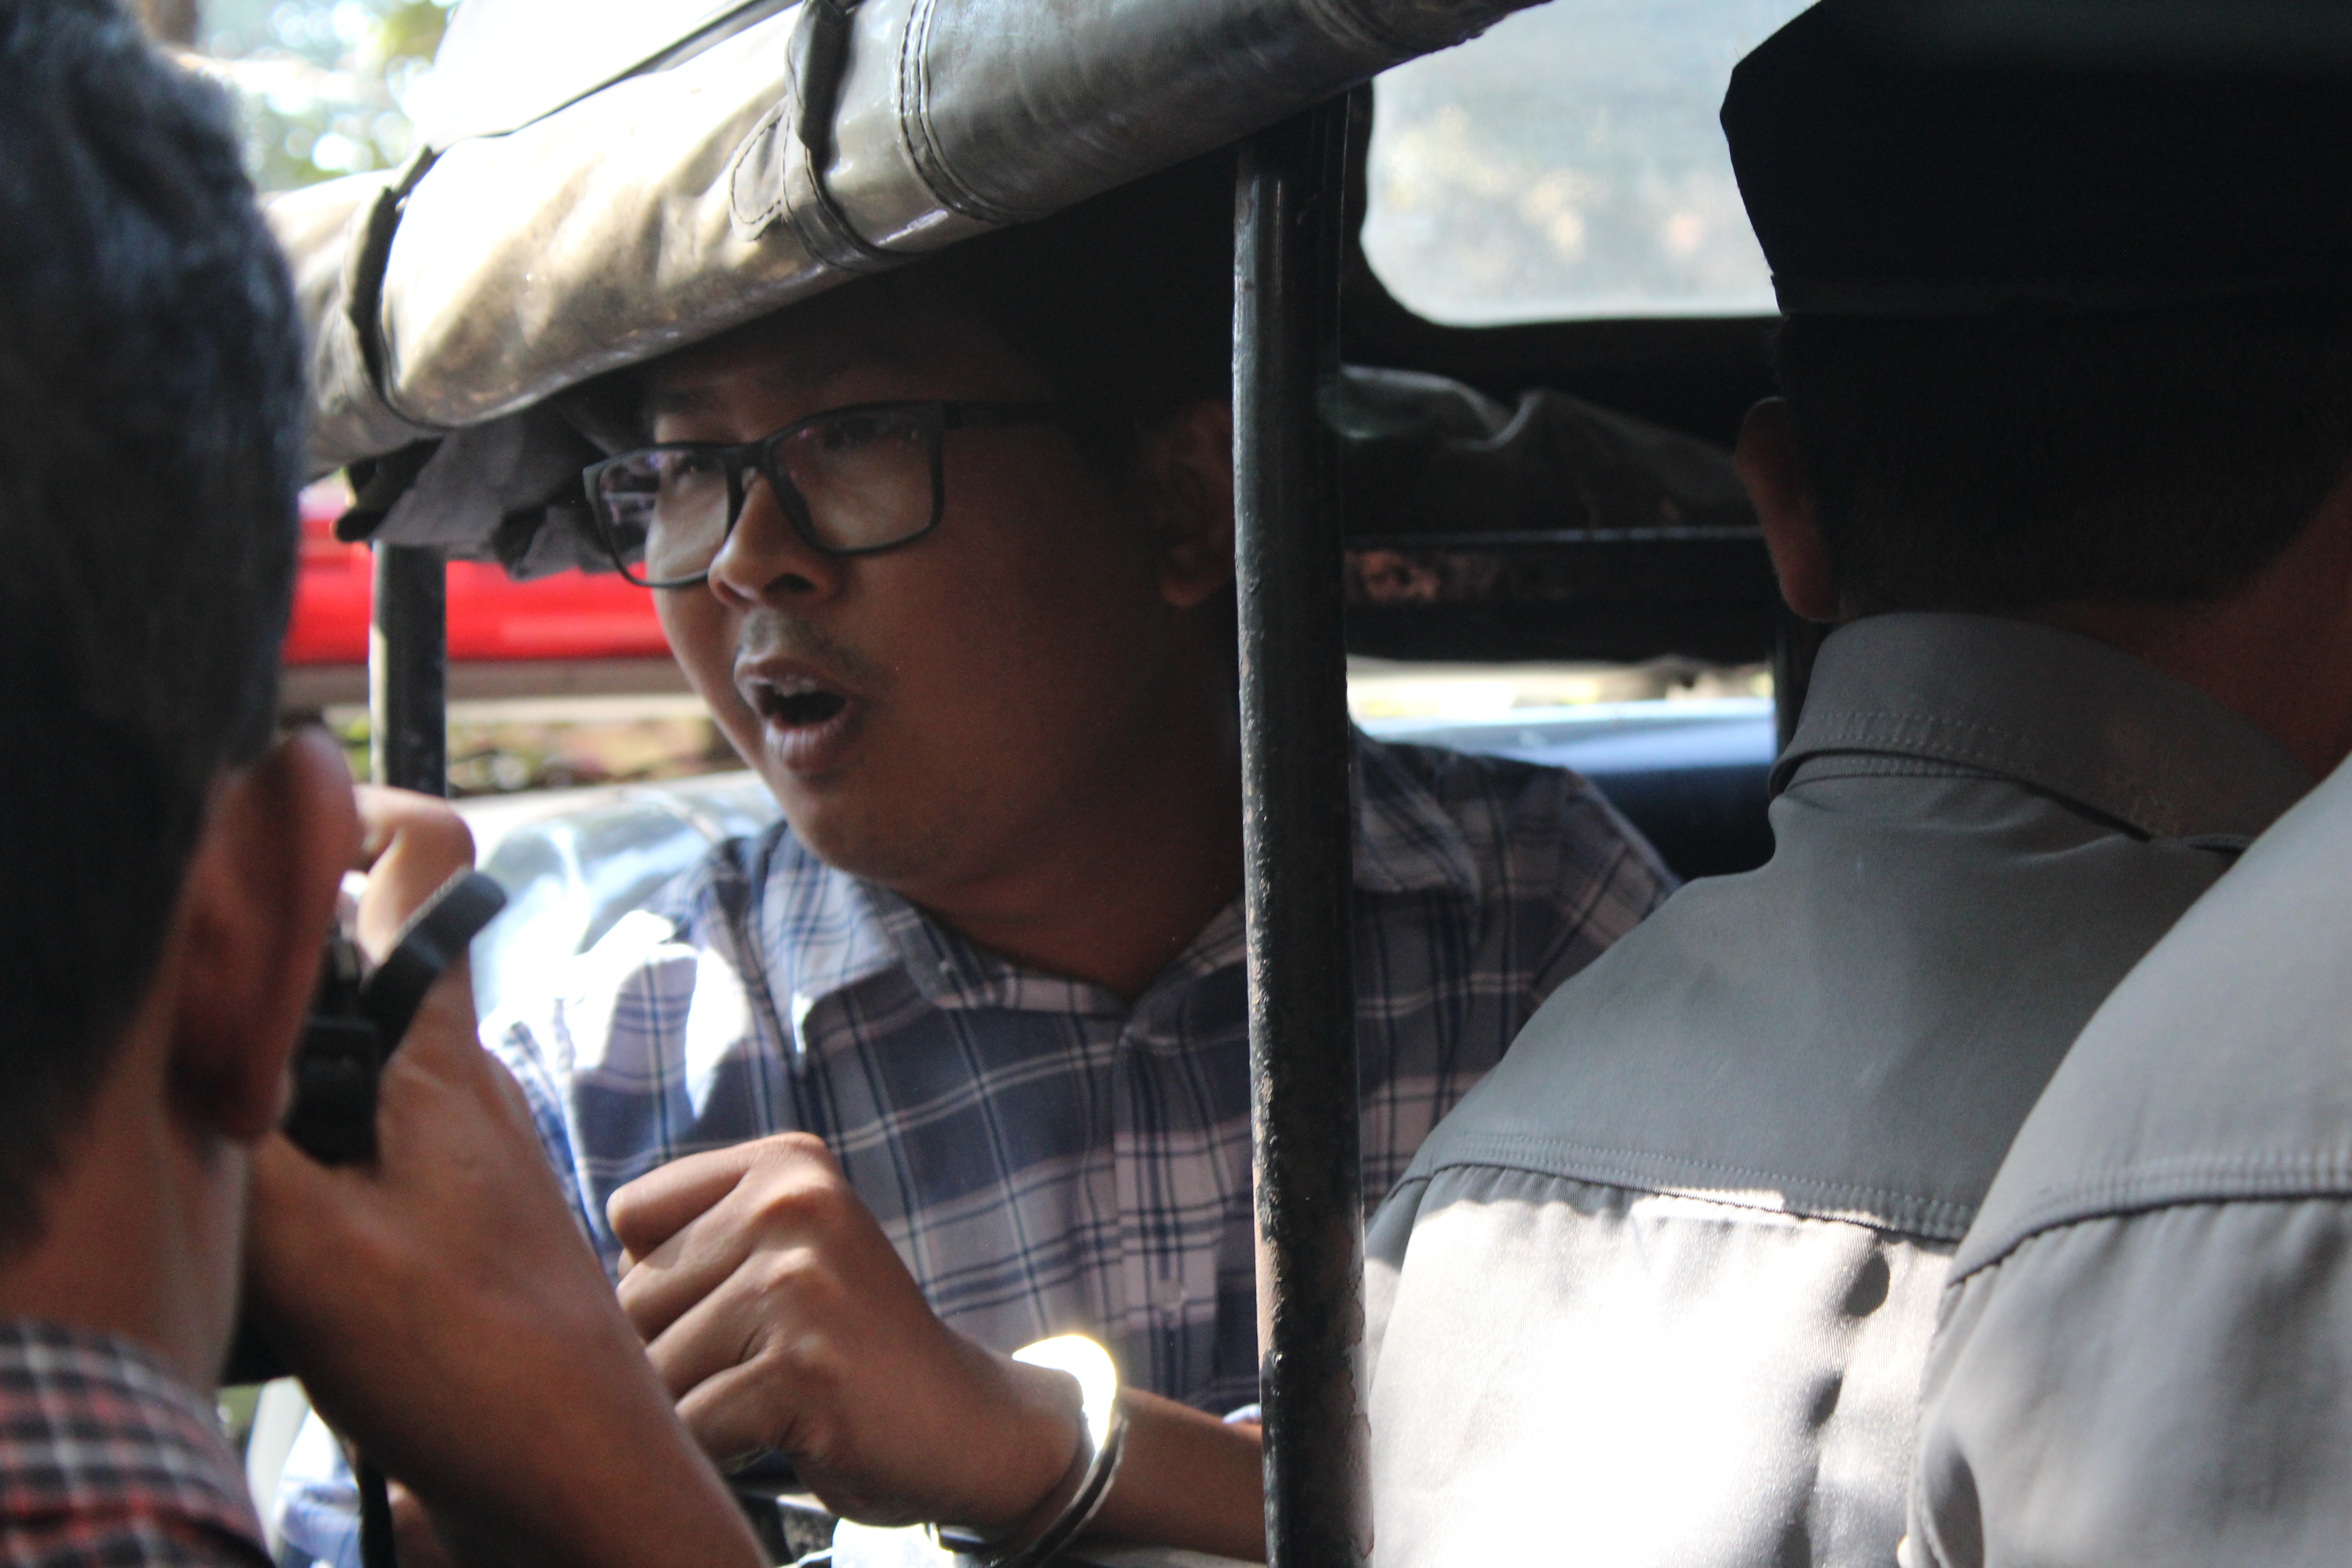 Reuters reporter Wa Lone speaks to reporters from the back of a police truck following a Jan. 23, 2018, hearing in Yangon. Photo: Jacob Goldberg